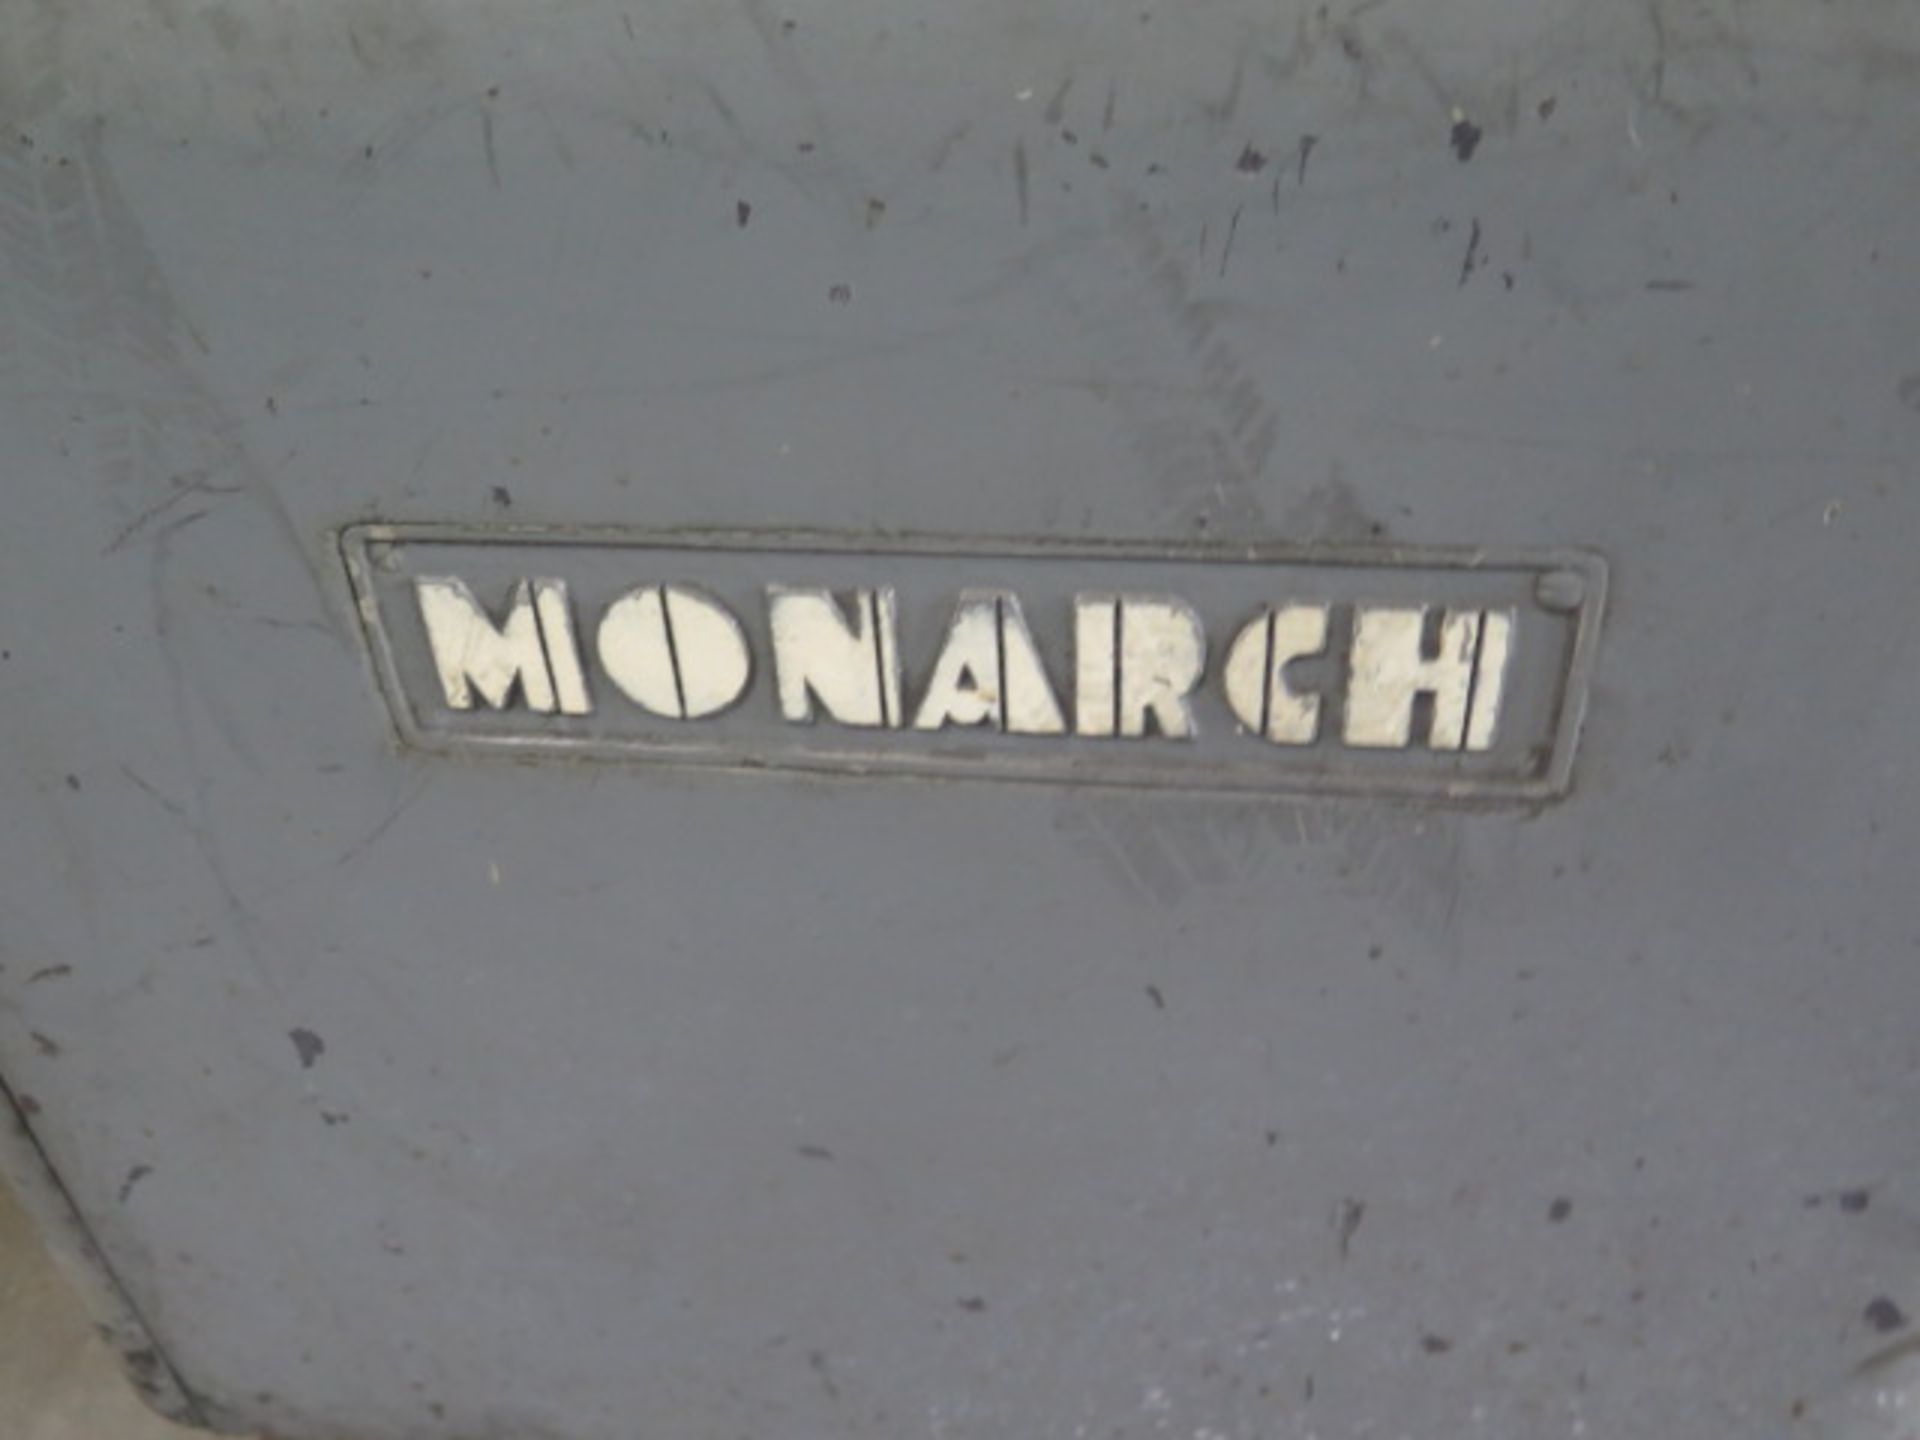 Monarch 10EE Tool Room Lathe s/n 11142 w/ 2500 RPM, Inch Threading, KDK Tool Post, SOLD AS IS - Image 11 of 12